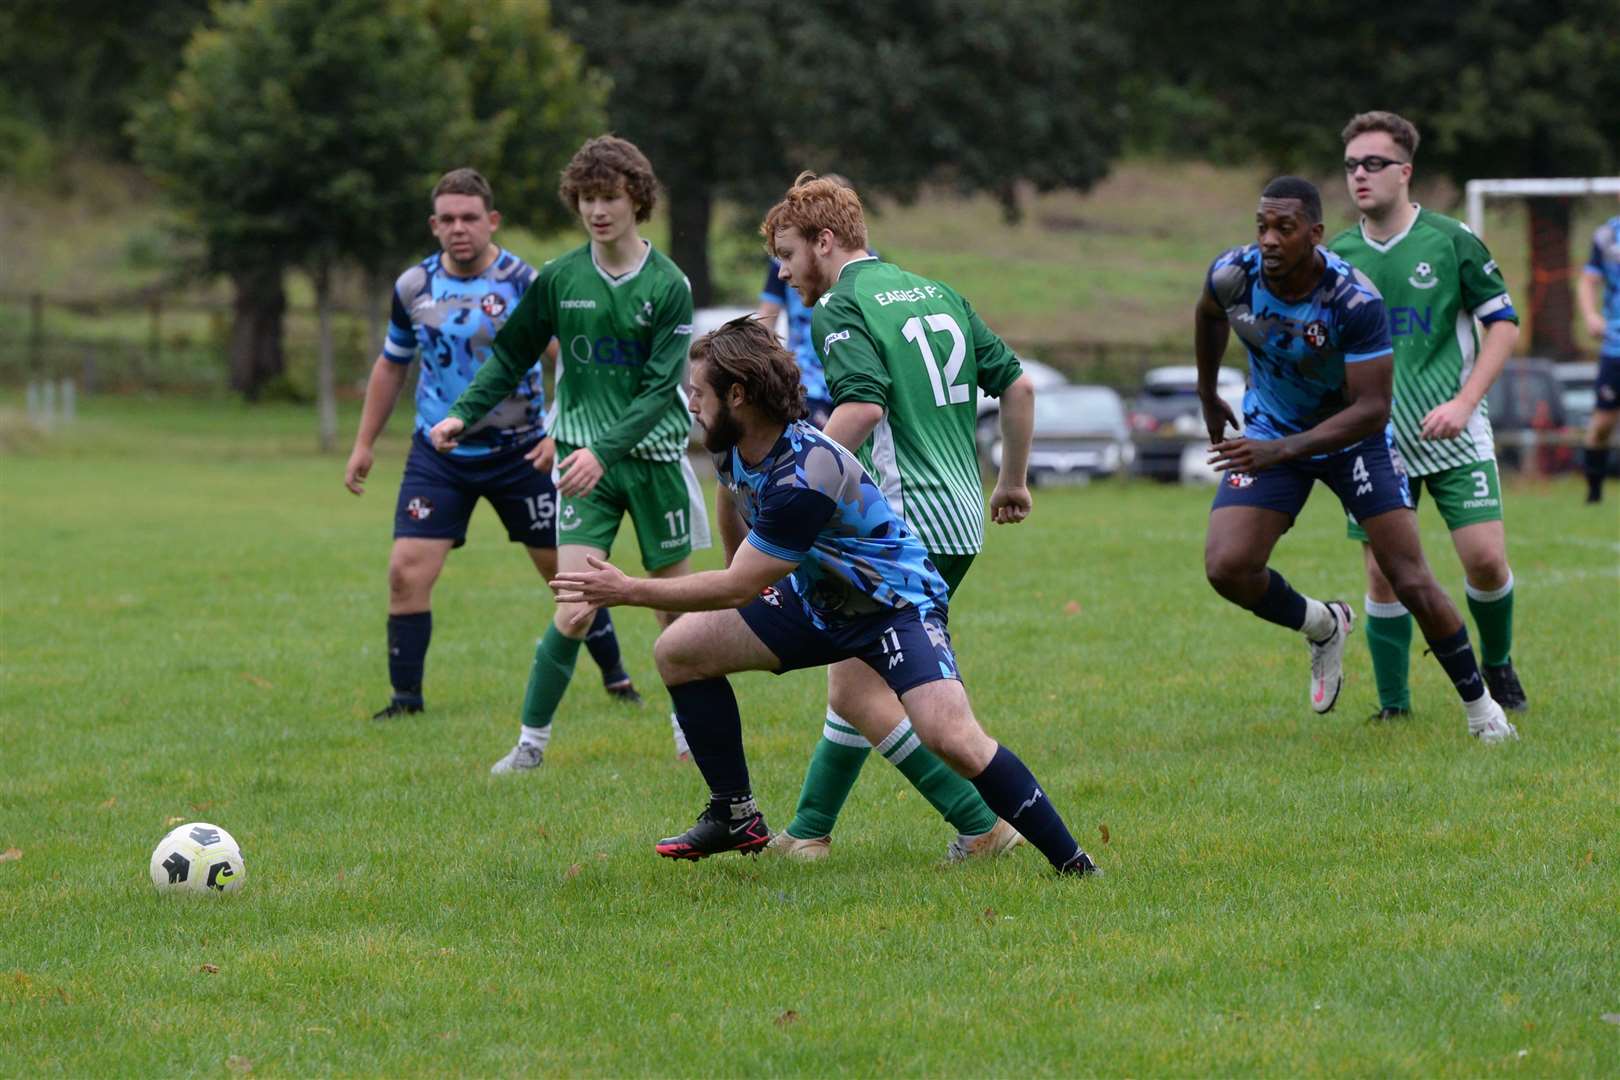 Action between Medway Sport XI and Eagles Gold in the Medway Area League Picture: Chris Davey